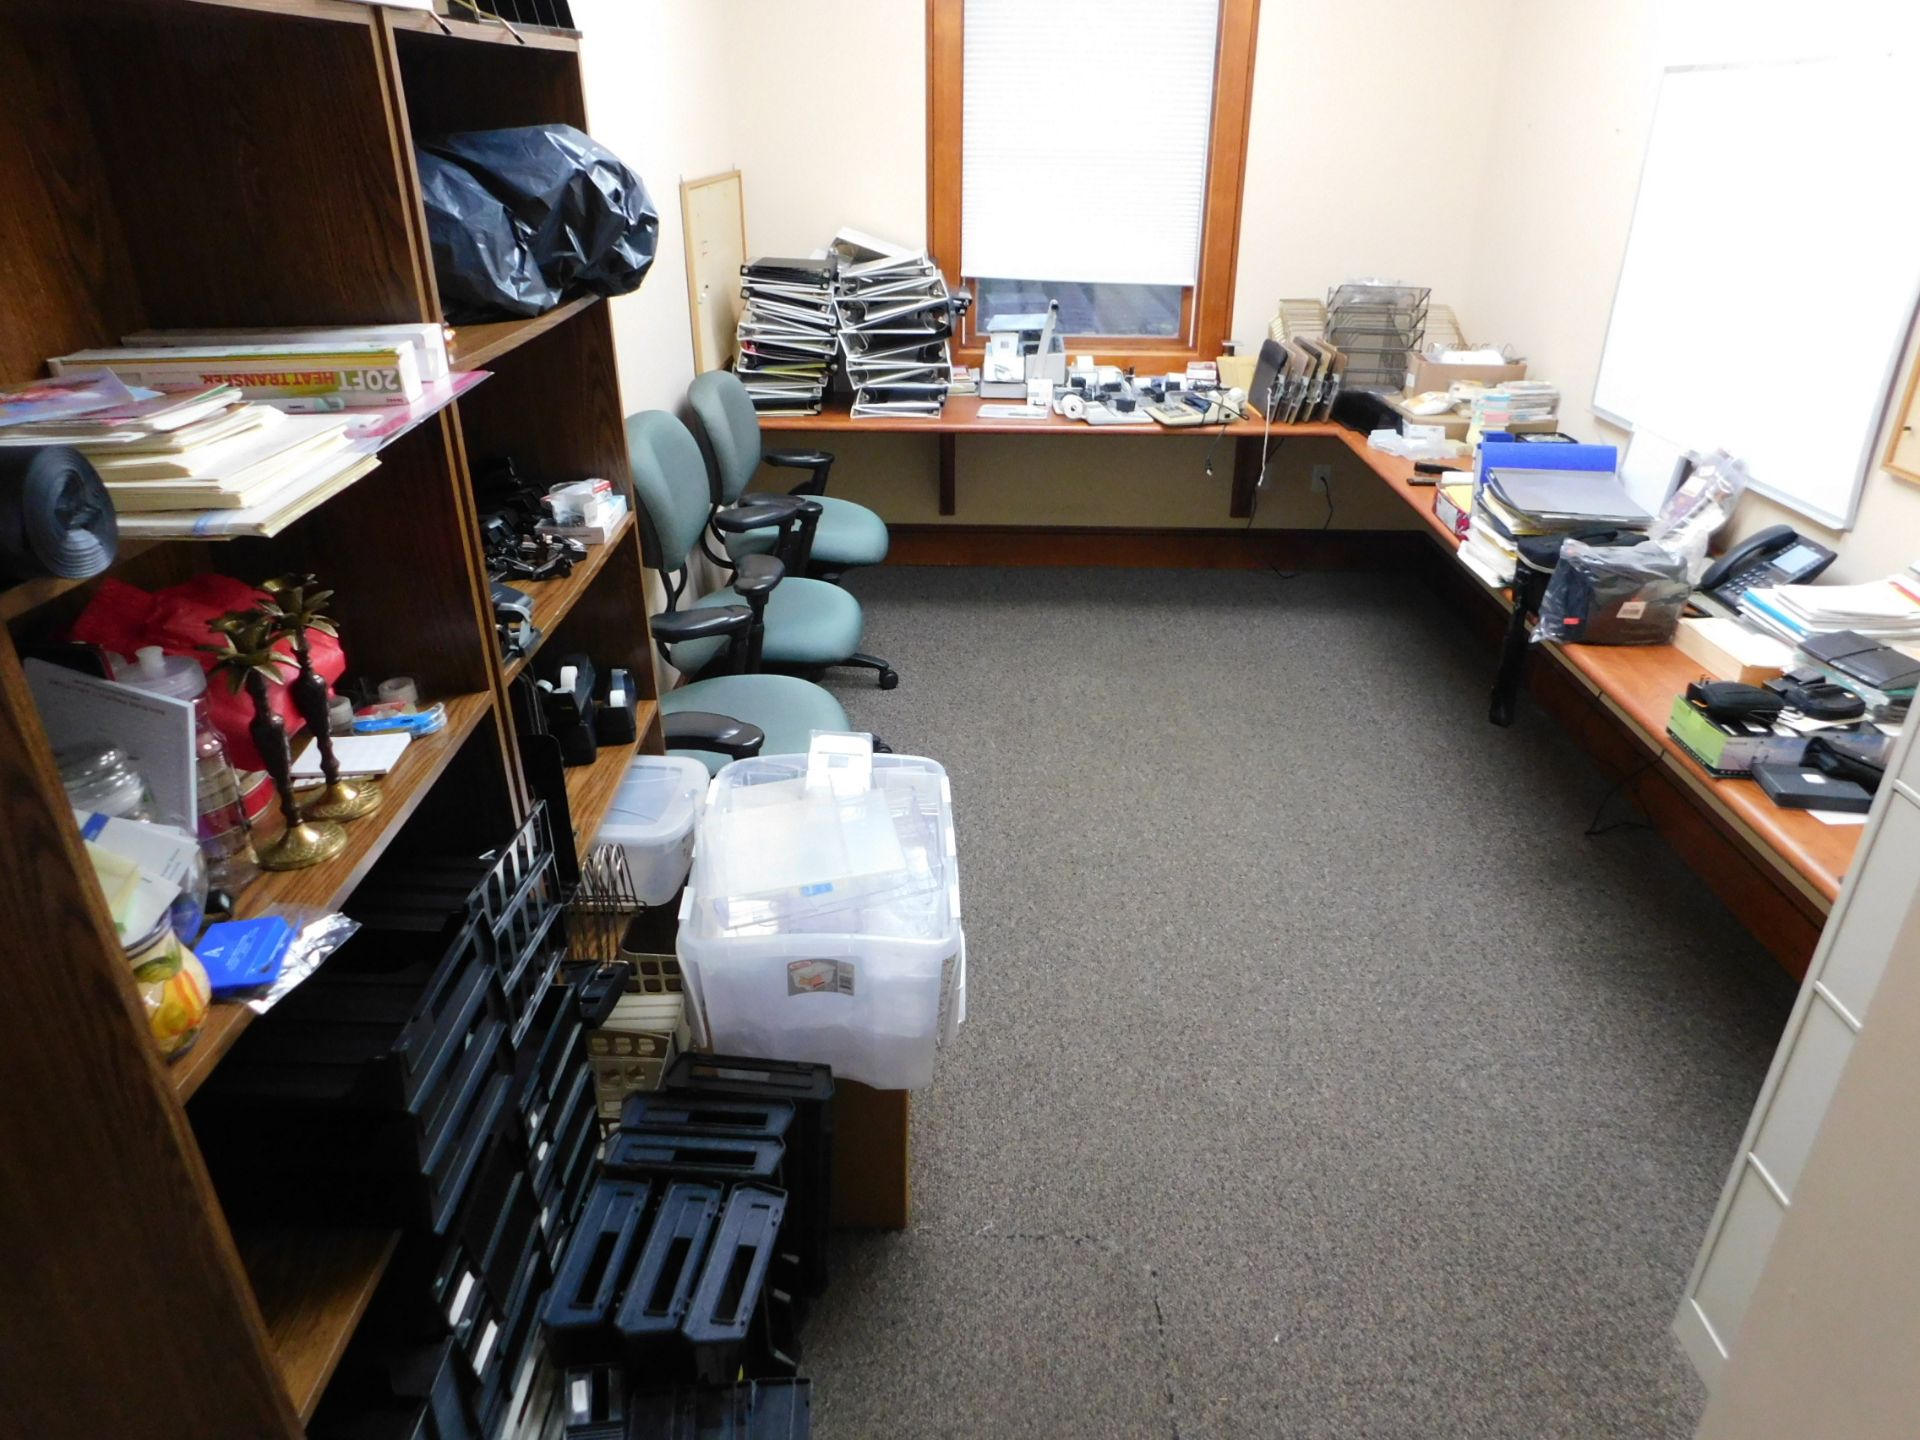 Contents of Room, Shelving, Chairs, Misc. Office Supplies